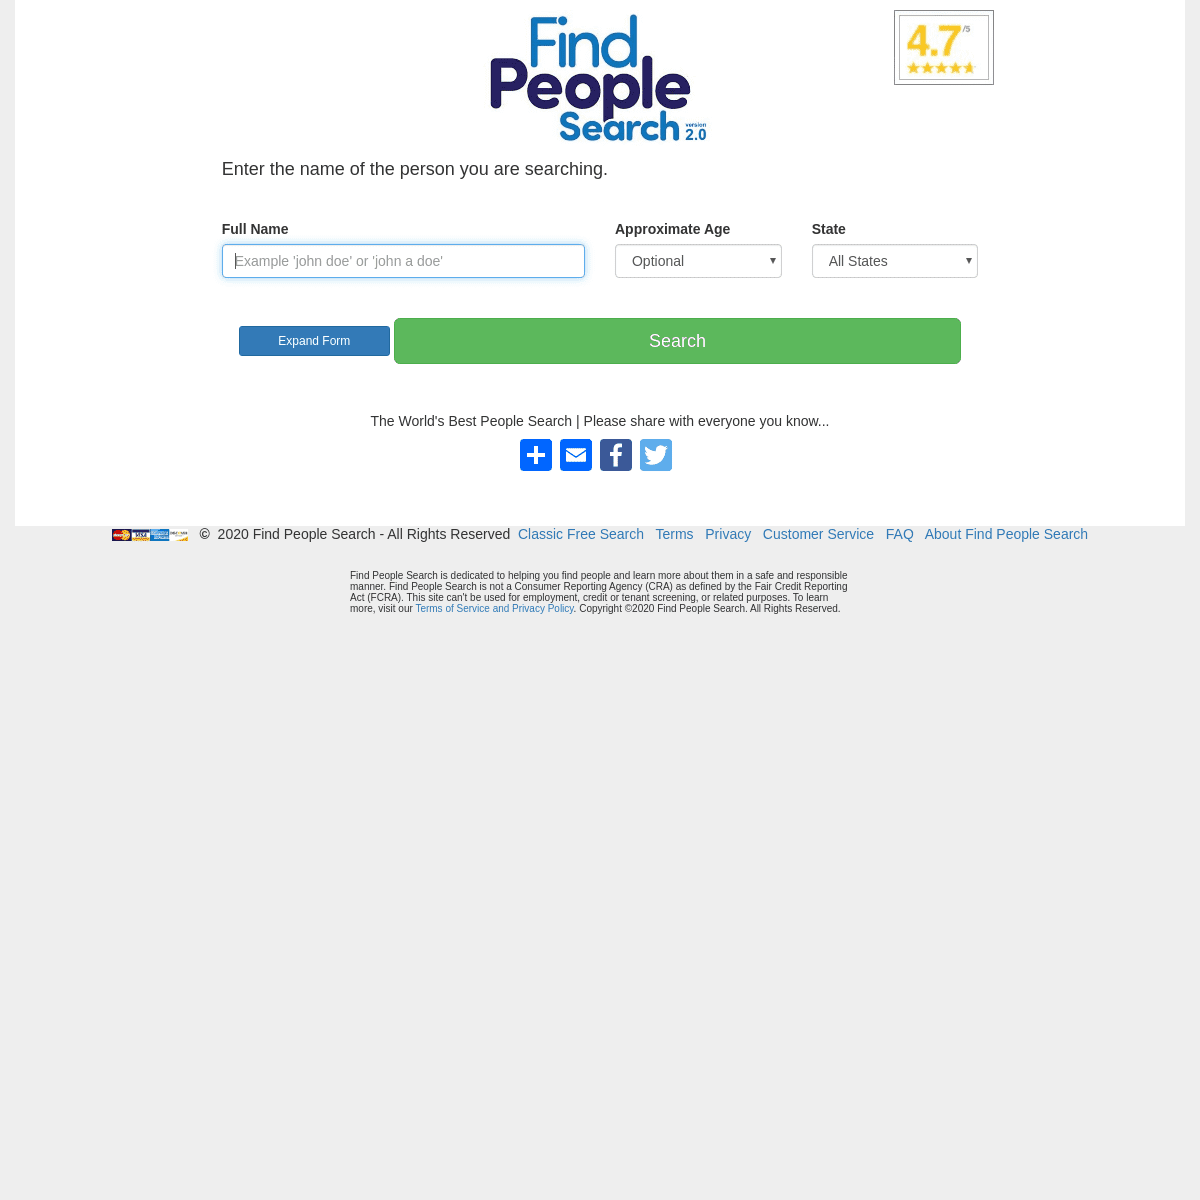 A complete backup of findpeoplesearch.com